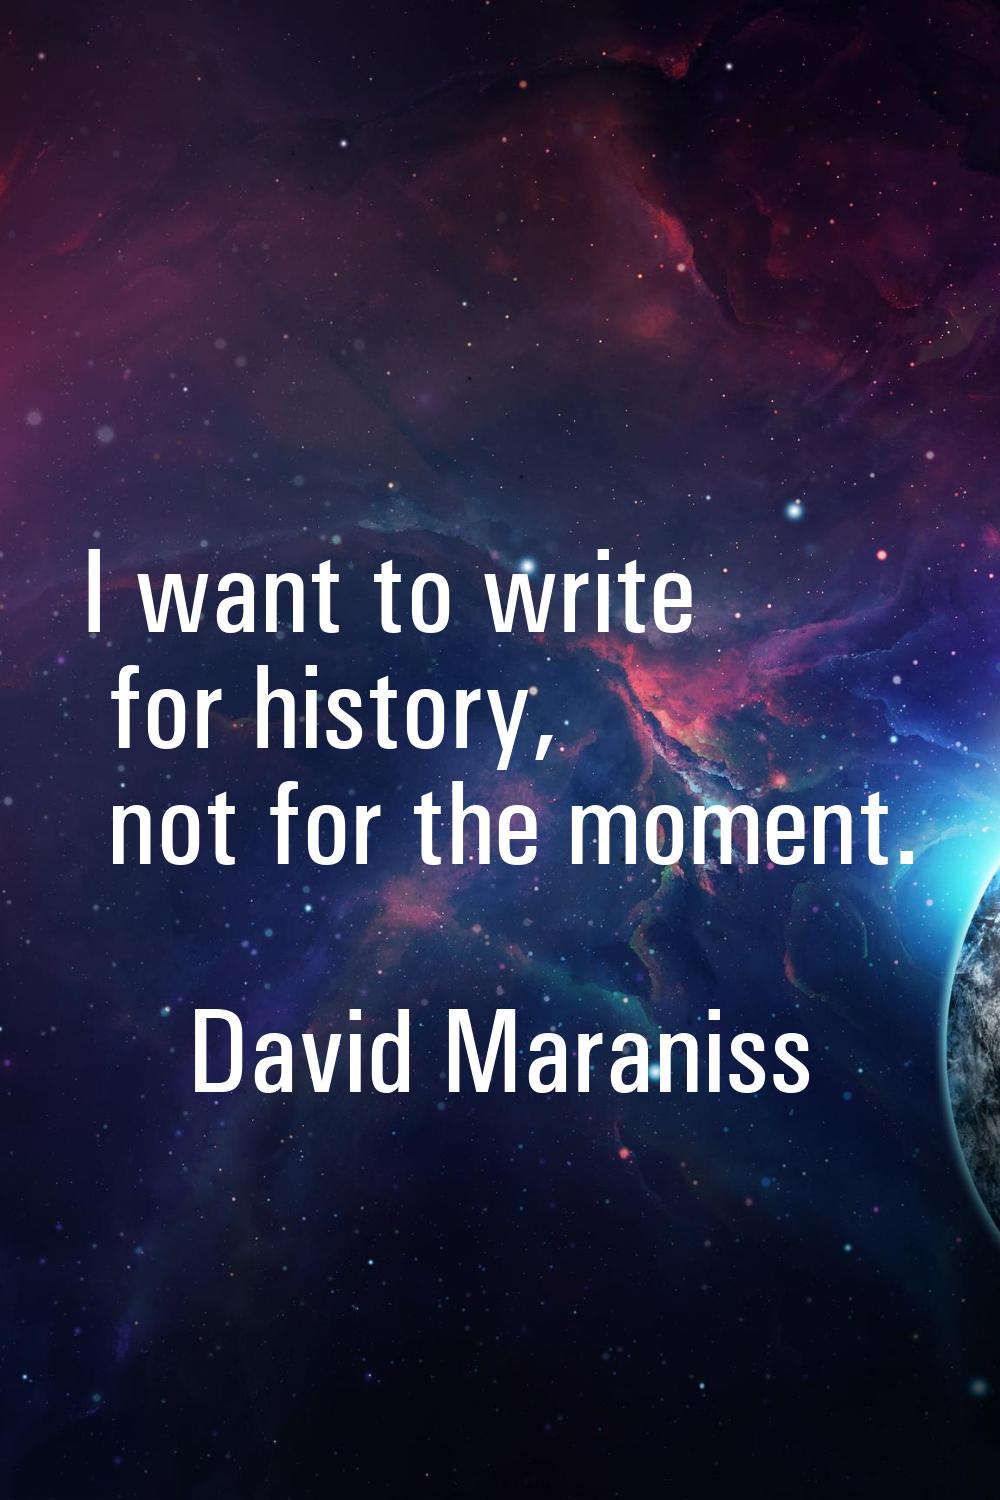 I want to write for history, not for the moment.